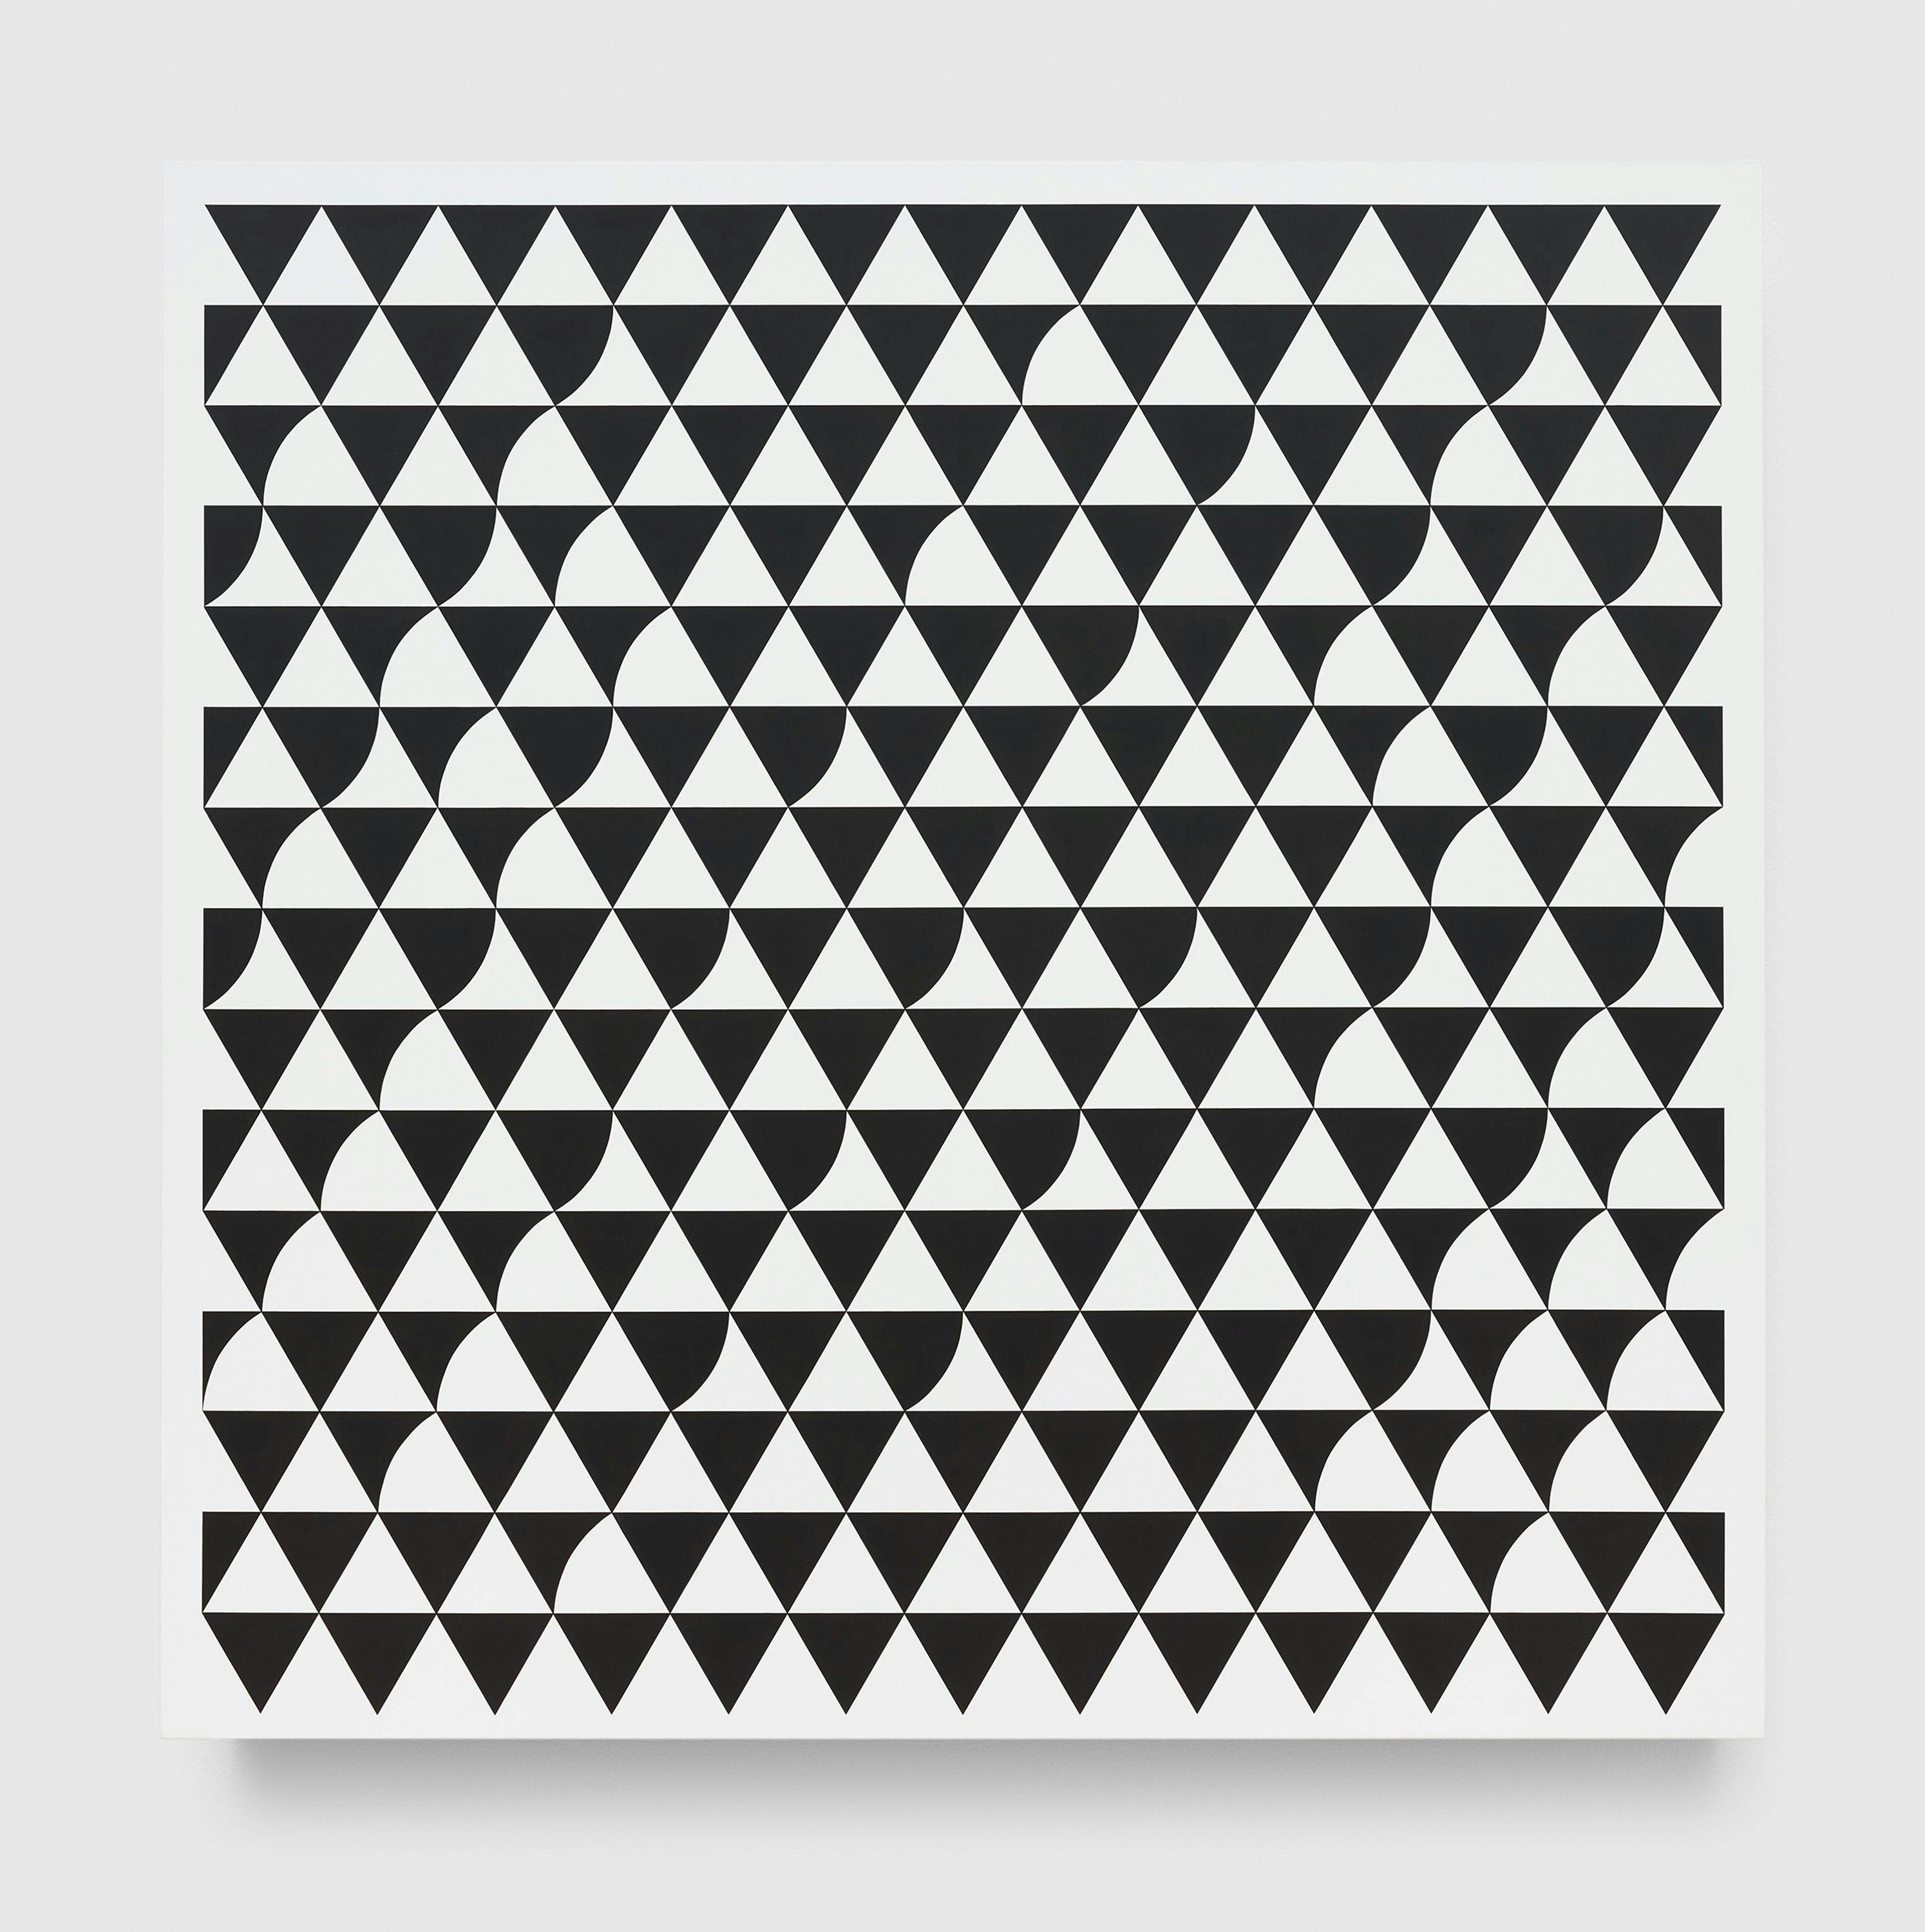 A painting by Bridget Riley, titled Rustle 6, dated 2015.